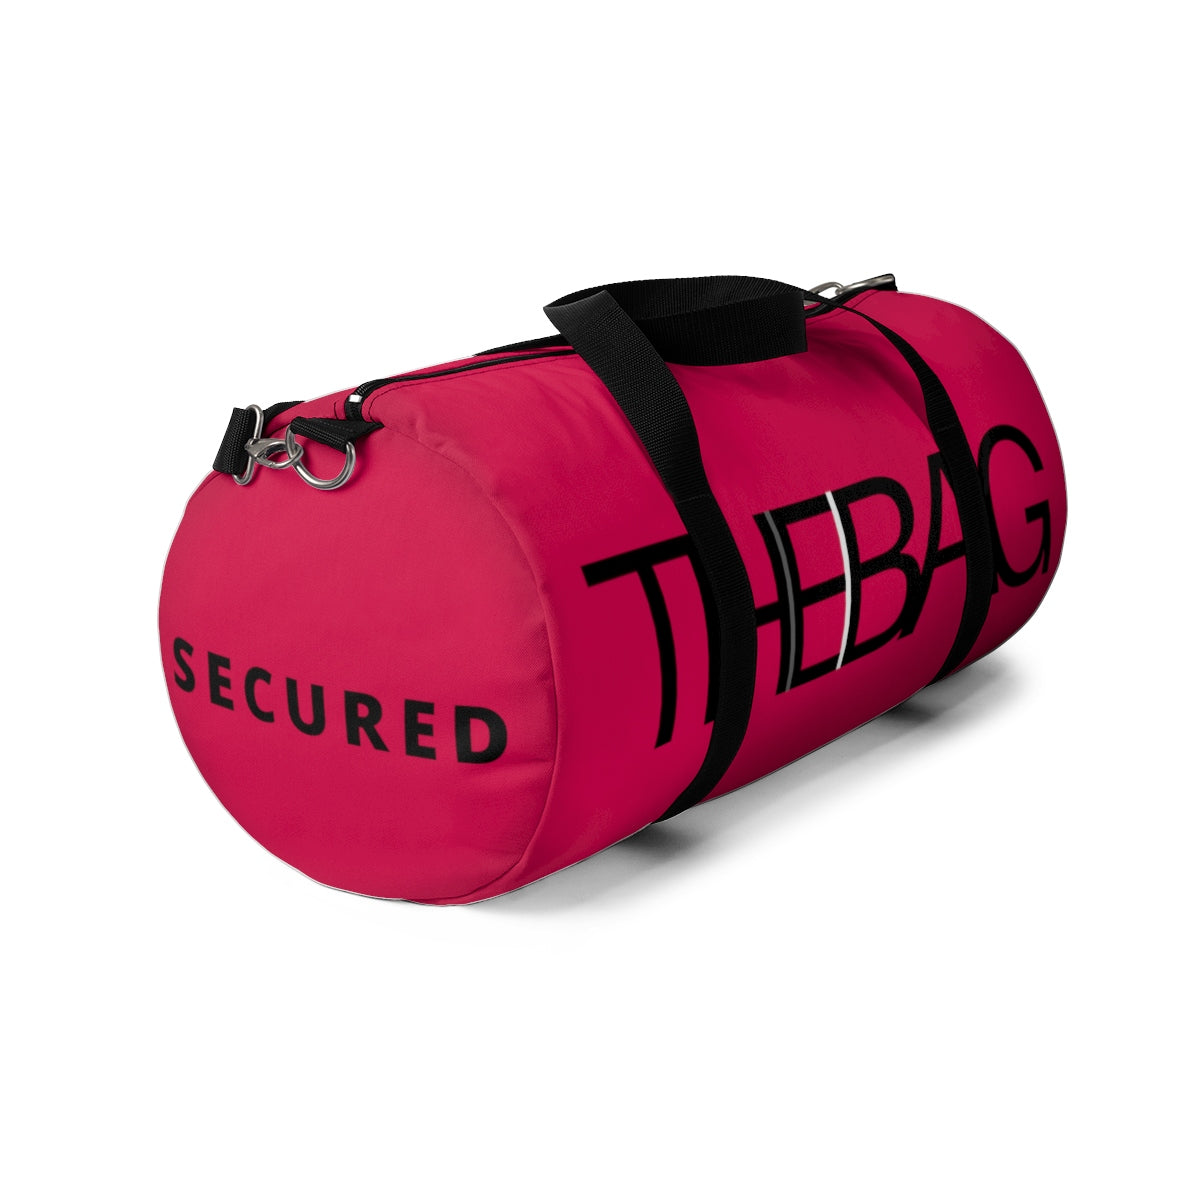 Secure The Bag (Miami Pink Duffle)